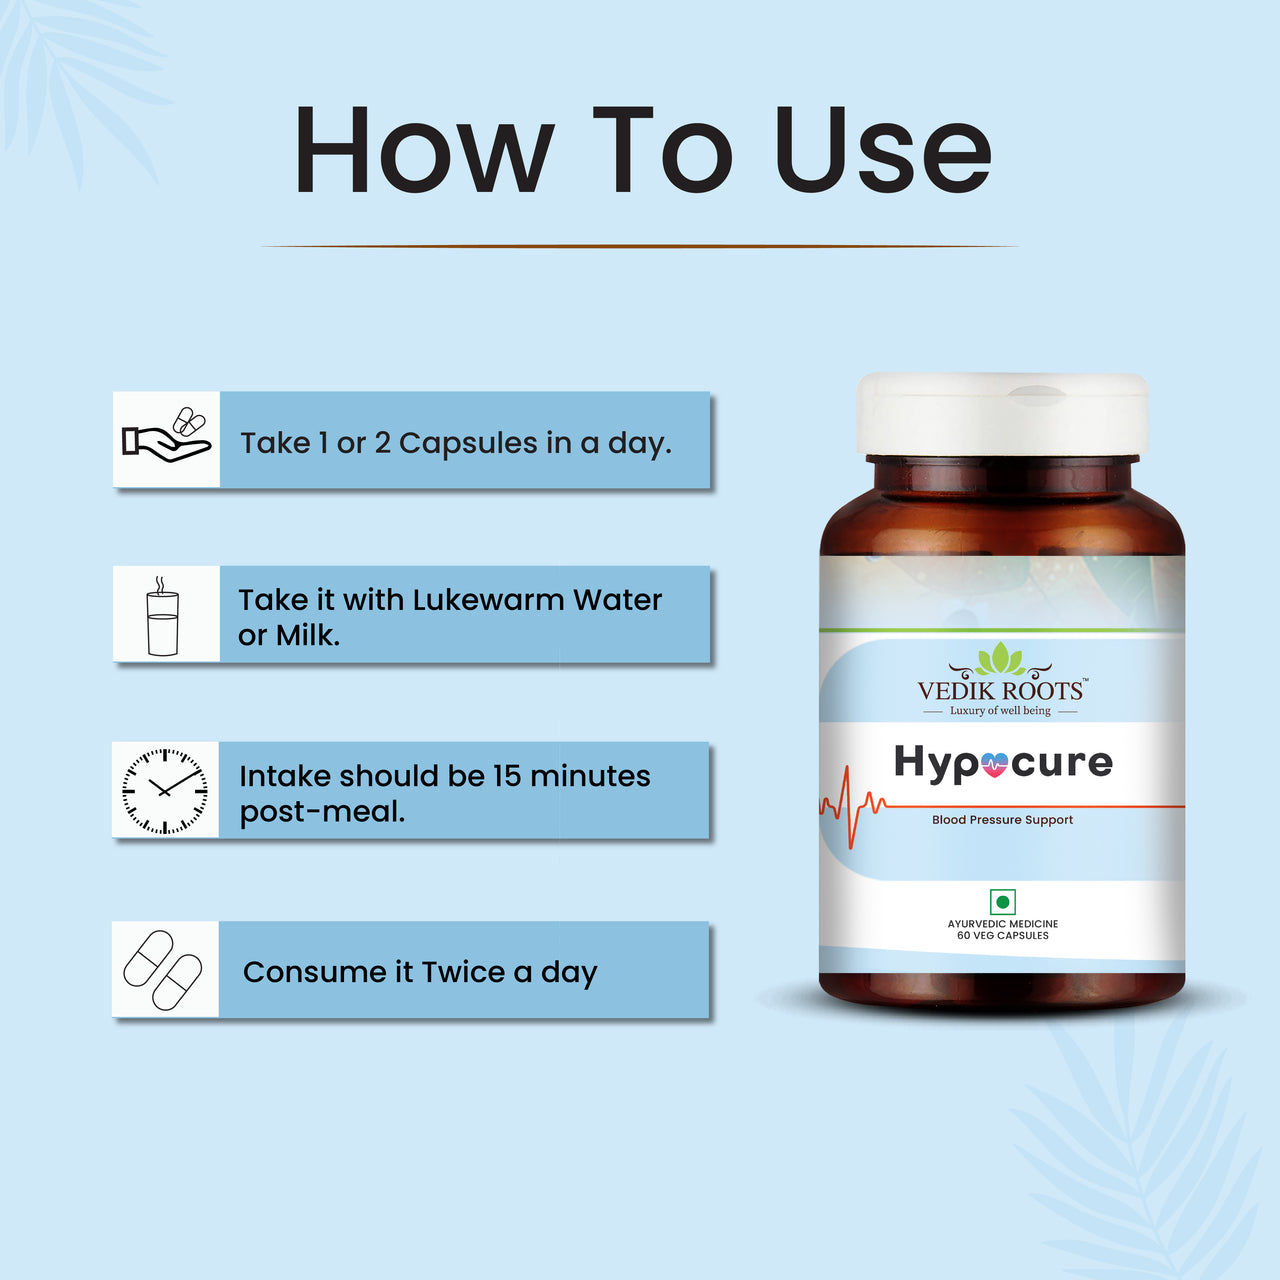 How to Use Hypocure Capsules | Vedikroots